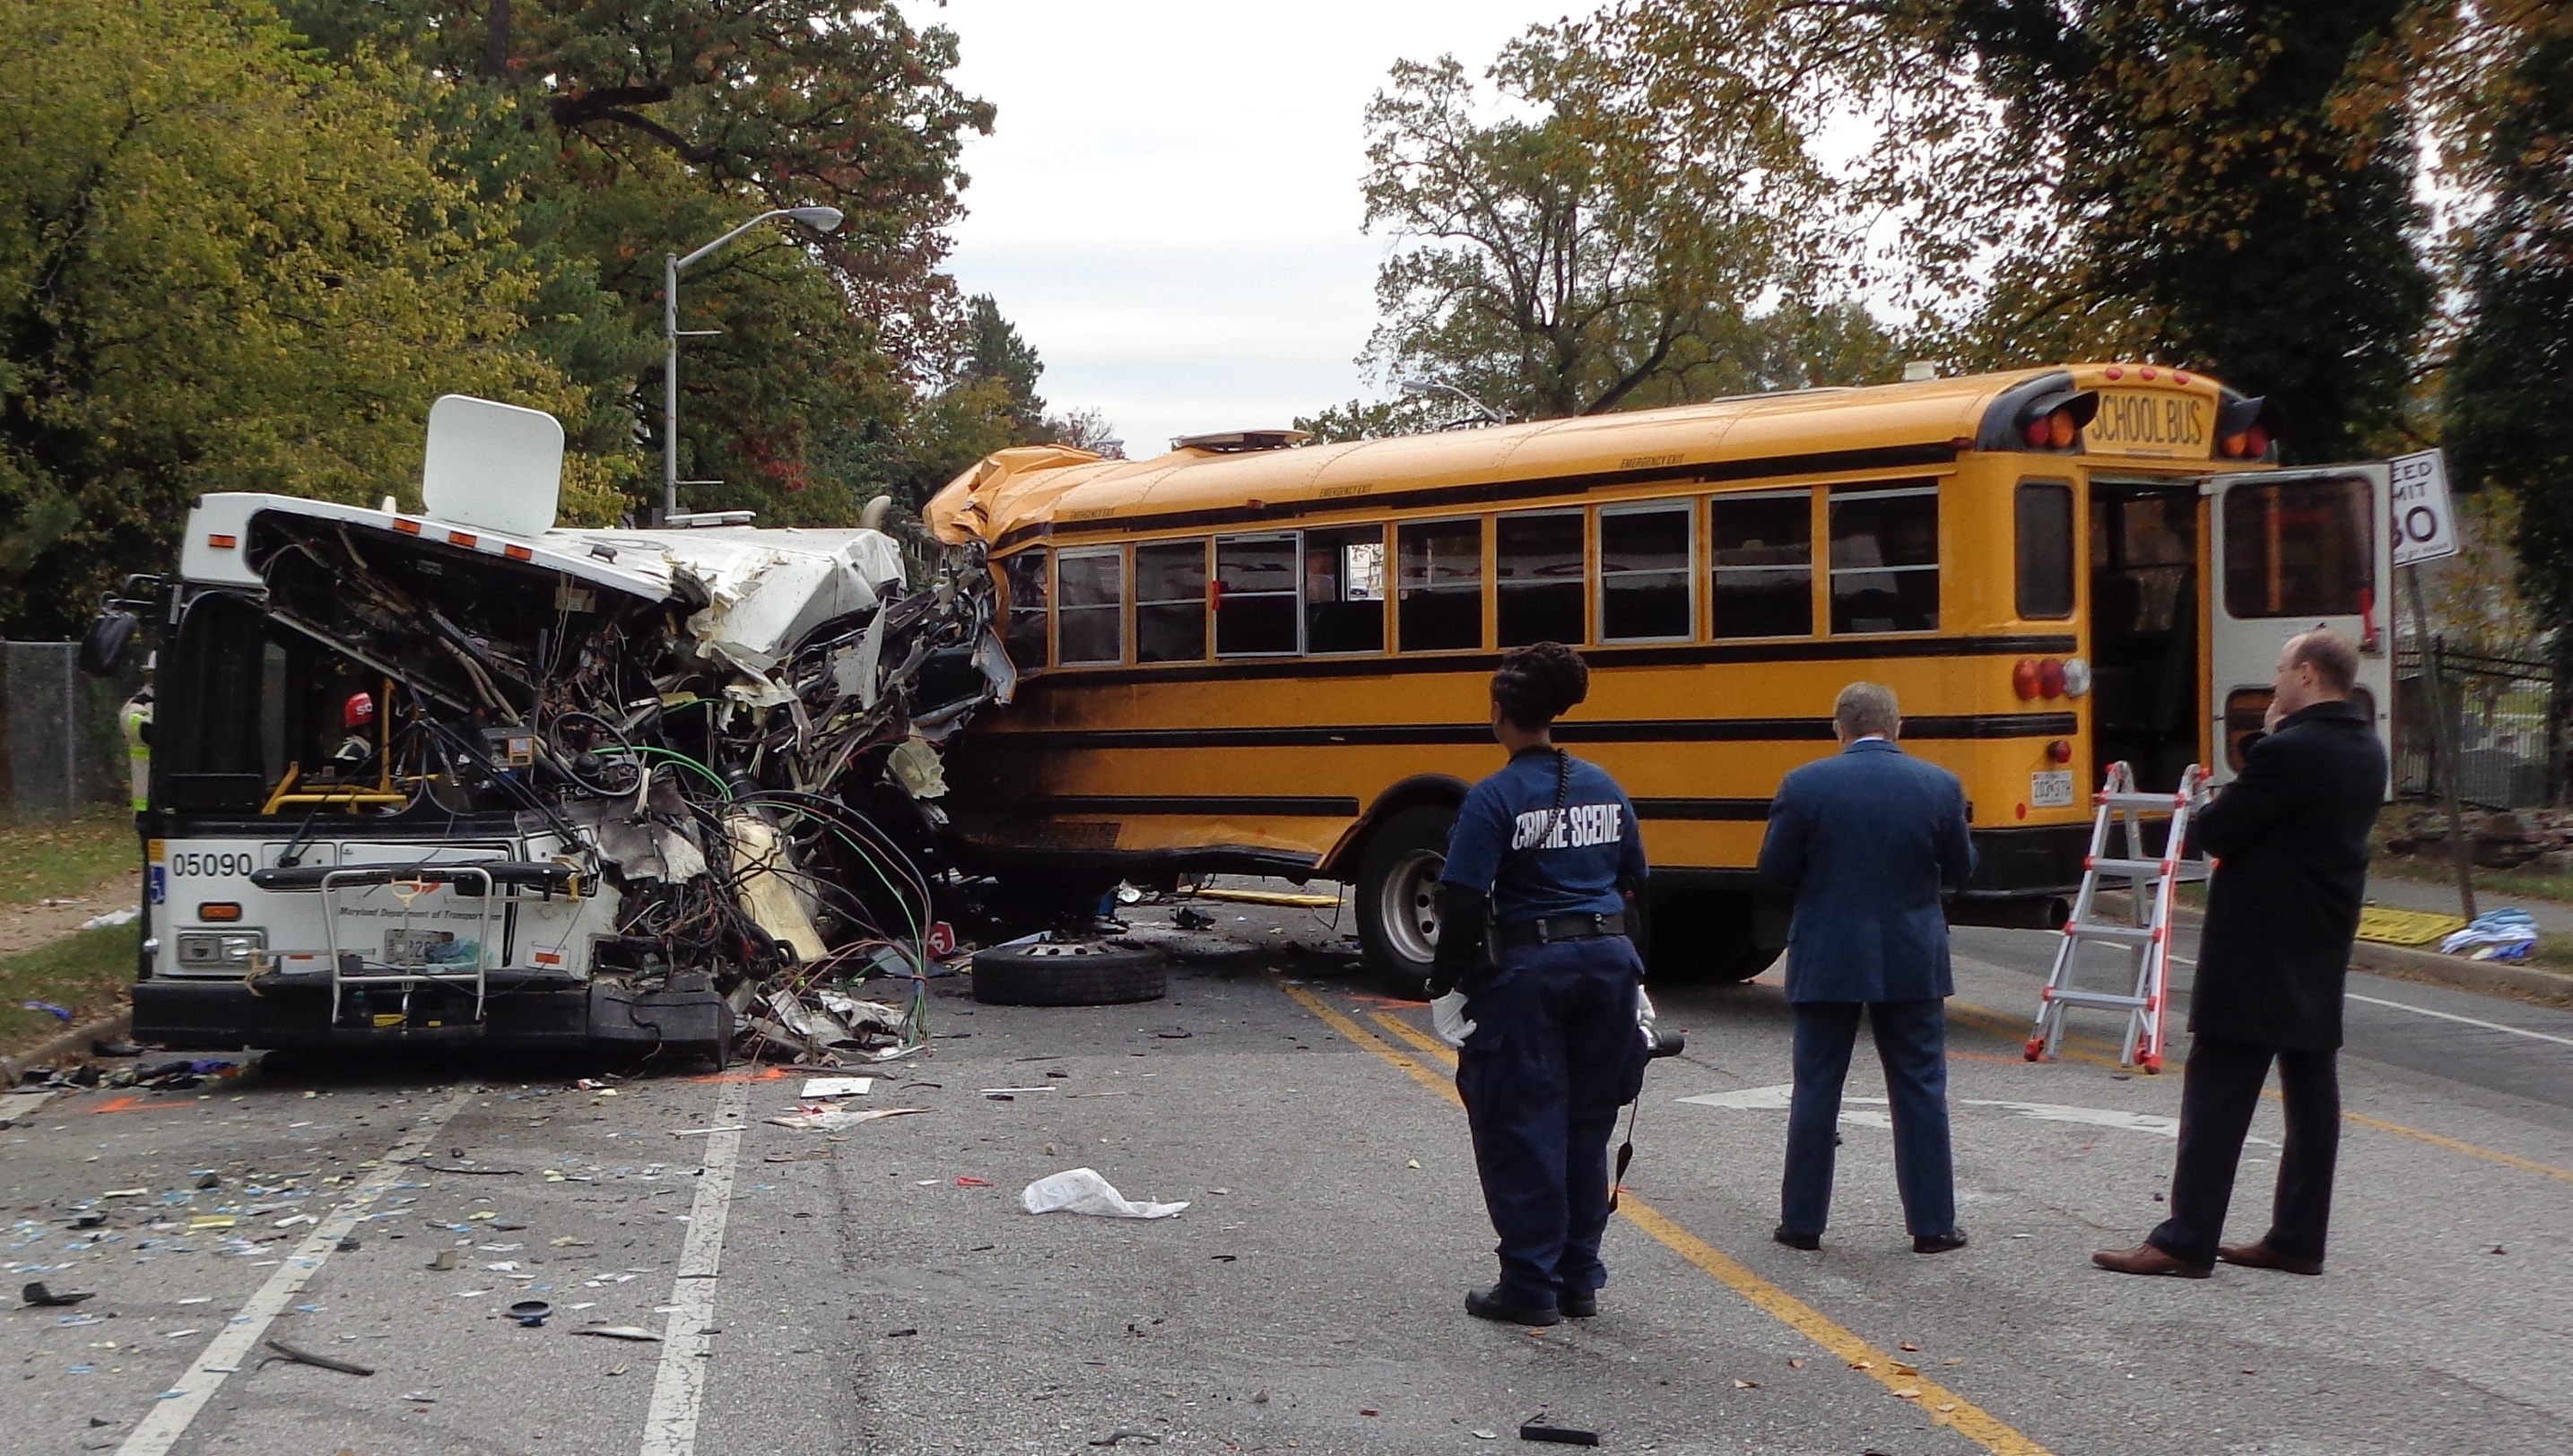 Final rest position of buses, looking east on Frederick Avenue. The damaged transit bus is shown at the left. The school bus is 